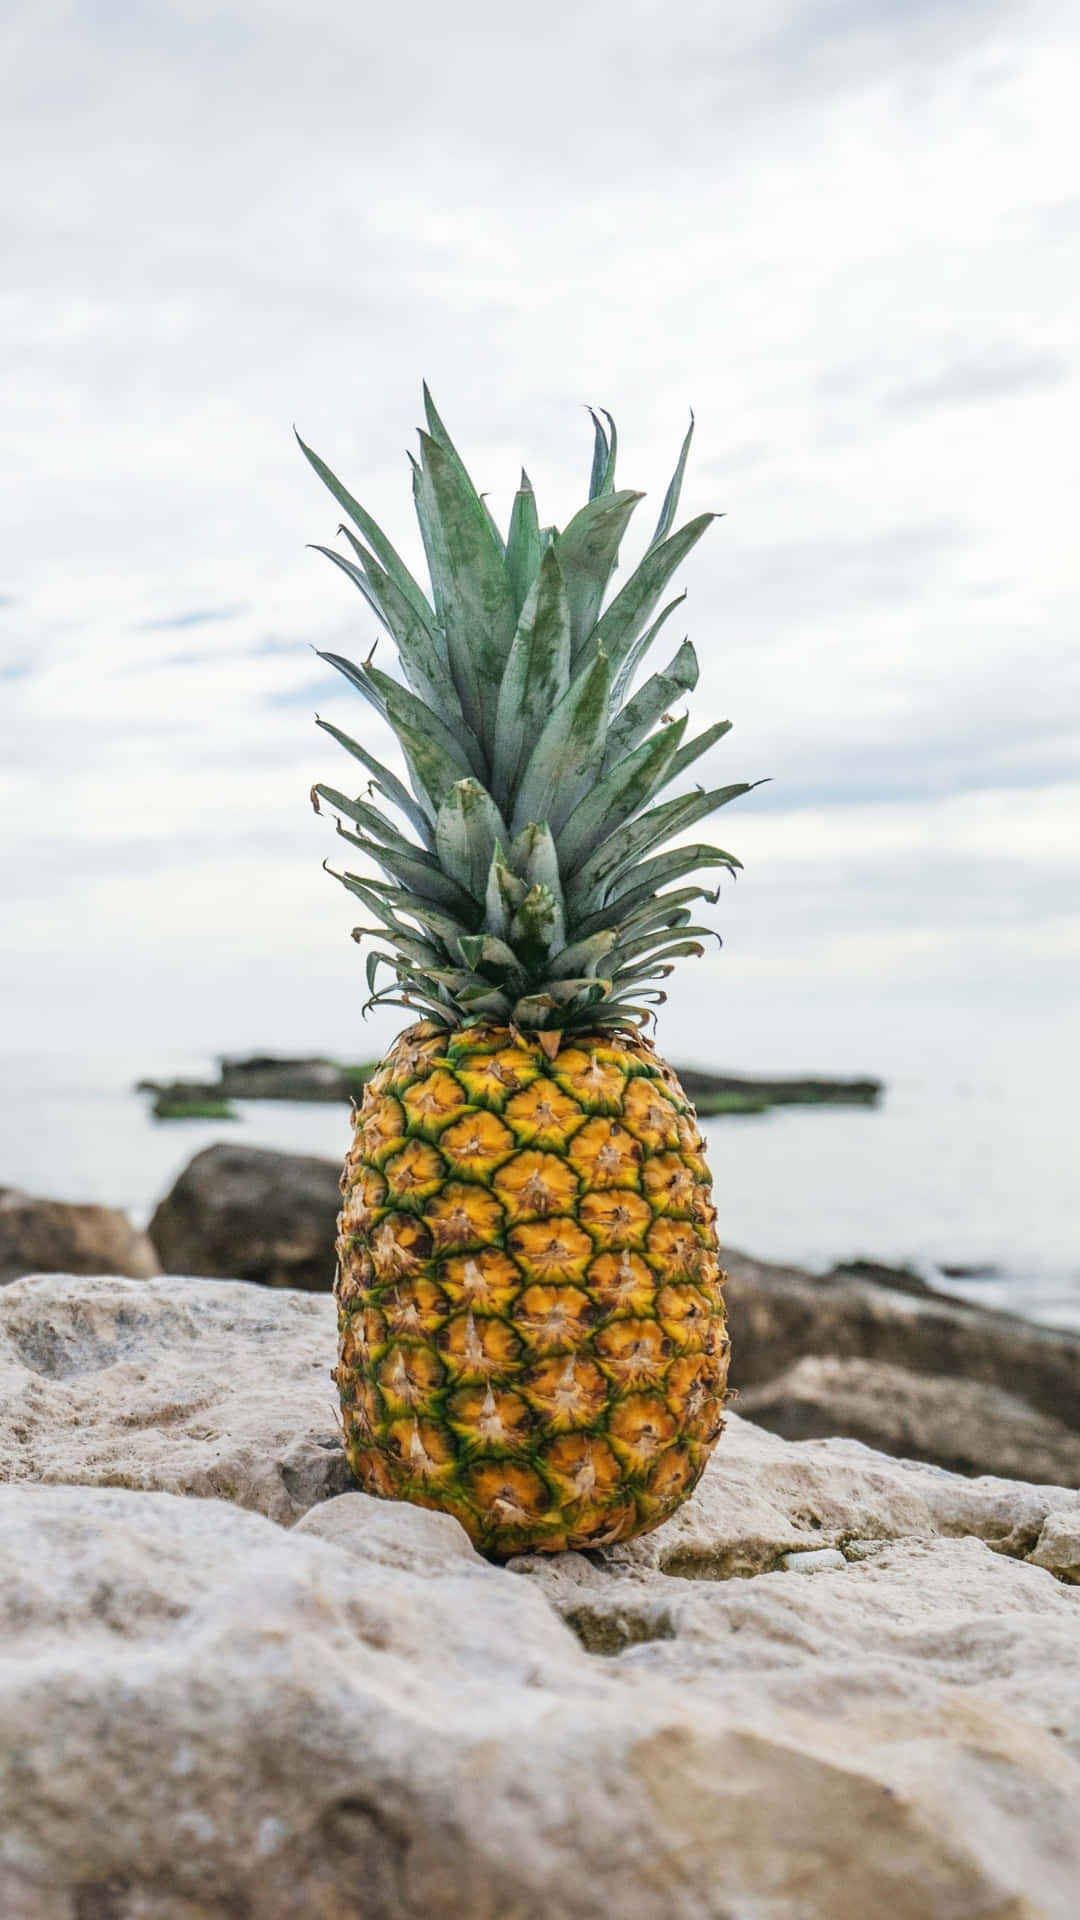 A ripe and juicy Pineapple ready to be eaten!